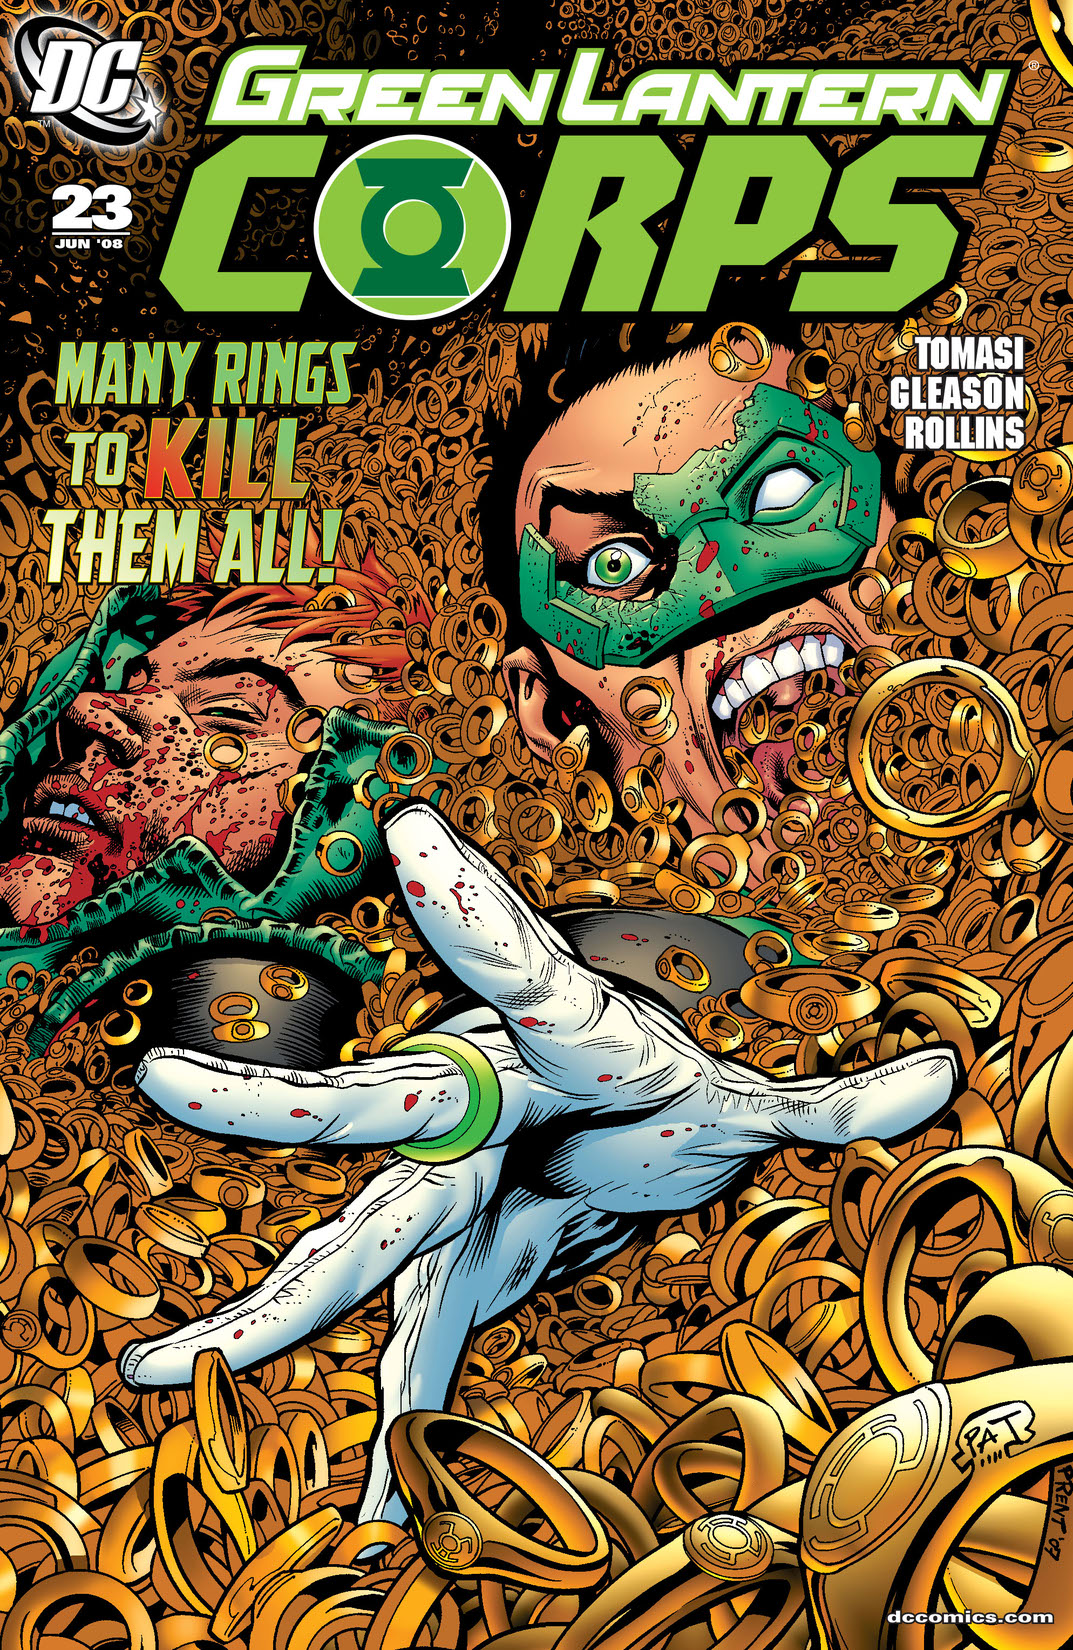 Green Lantern Corps (2006-) #23 preview images